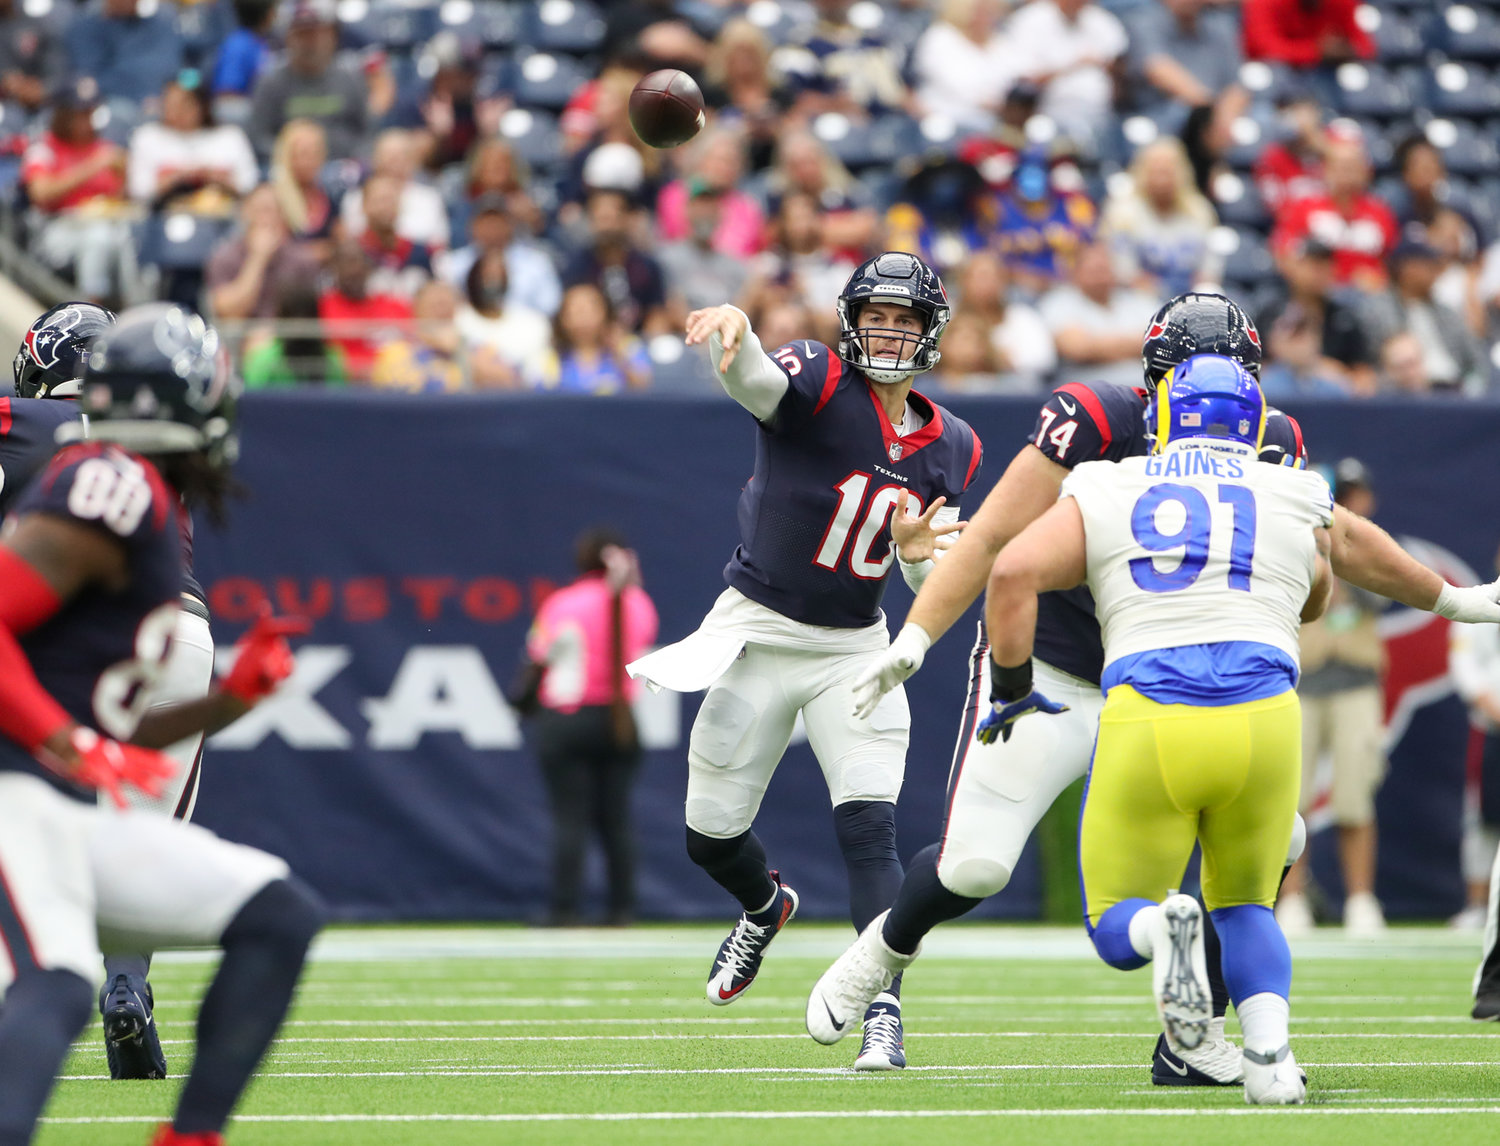 Houston Texans quarterback Davis Mills (10) passes the ball during an NFL game between Houston and the Los Angeles Rams on October 31, 2021 in Houston, Texas.